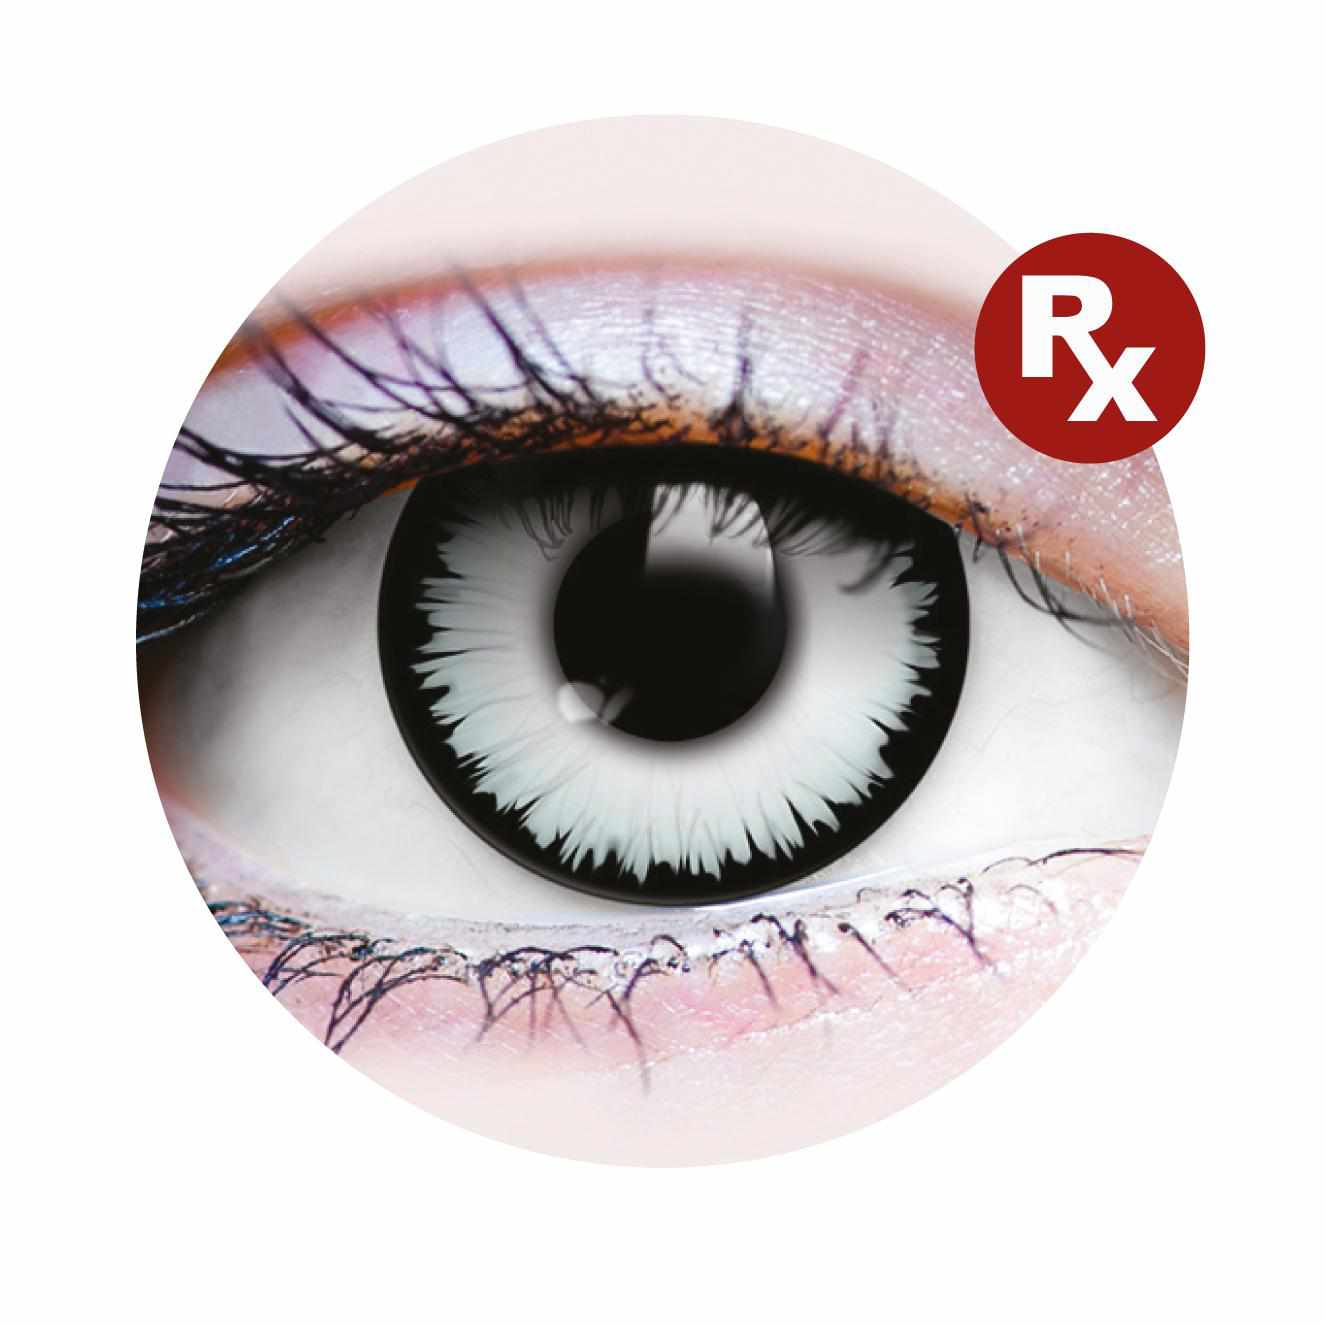 WhiteColored contact lenses, Halloween Cosplay, color contacts, krazy lens, fancy lens, circle lens.